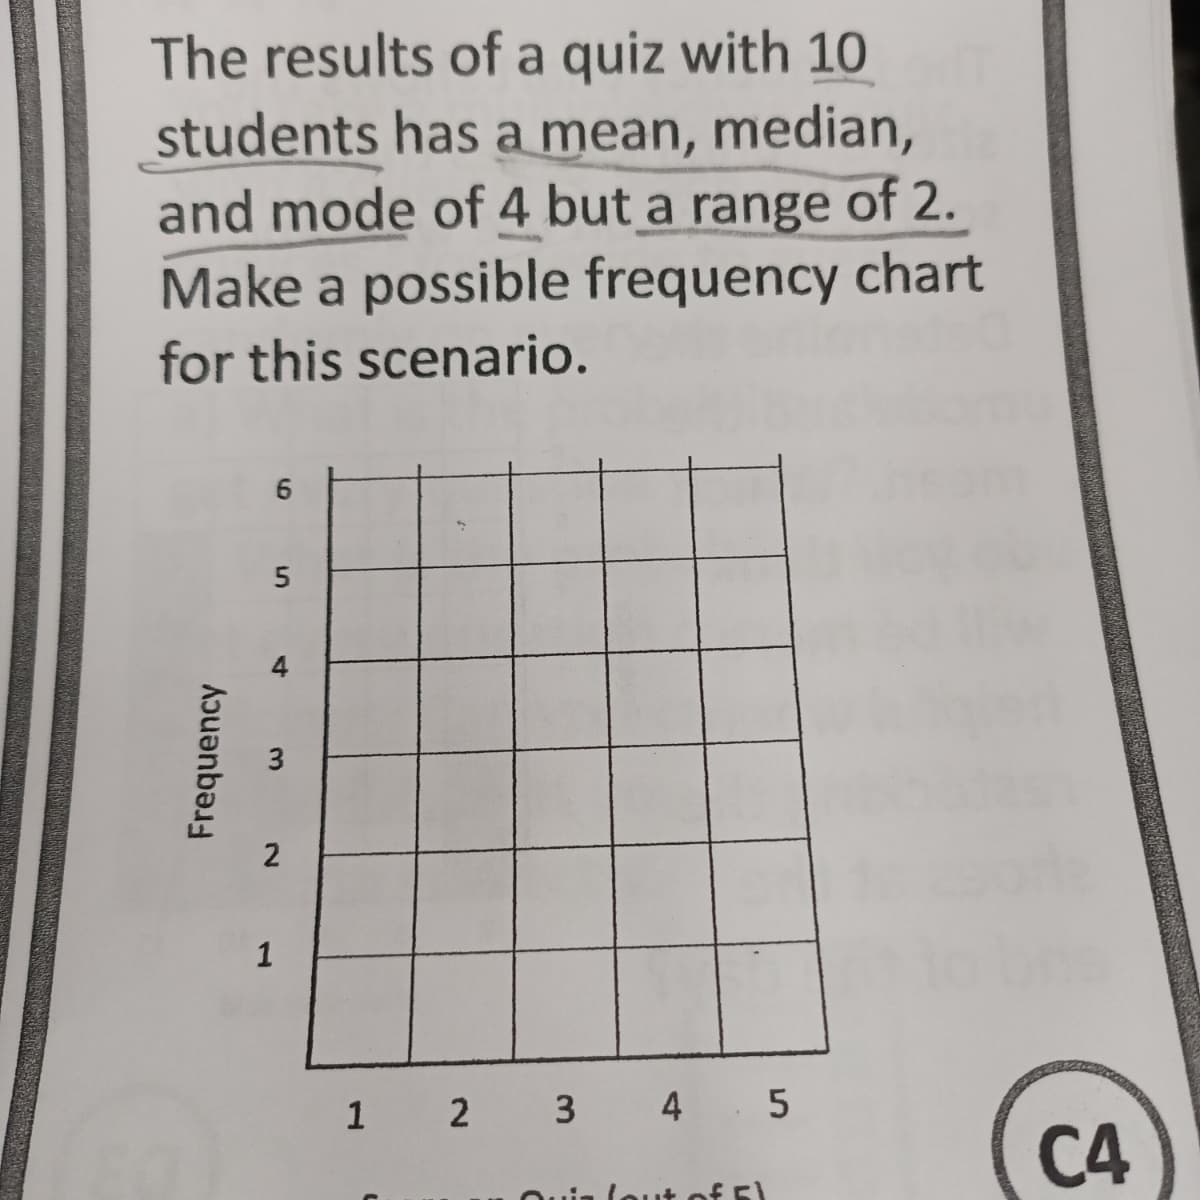 The results of a quiz with 10
students has a mean, median,
and mode of 4 but a range of 2.
Make a possible frequency chart
for this scenario.
Frequency
6
5
4
2
1
1 2 3 4 5
Qui
lout of 5)
C4